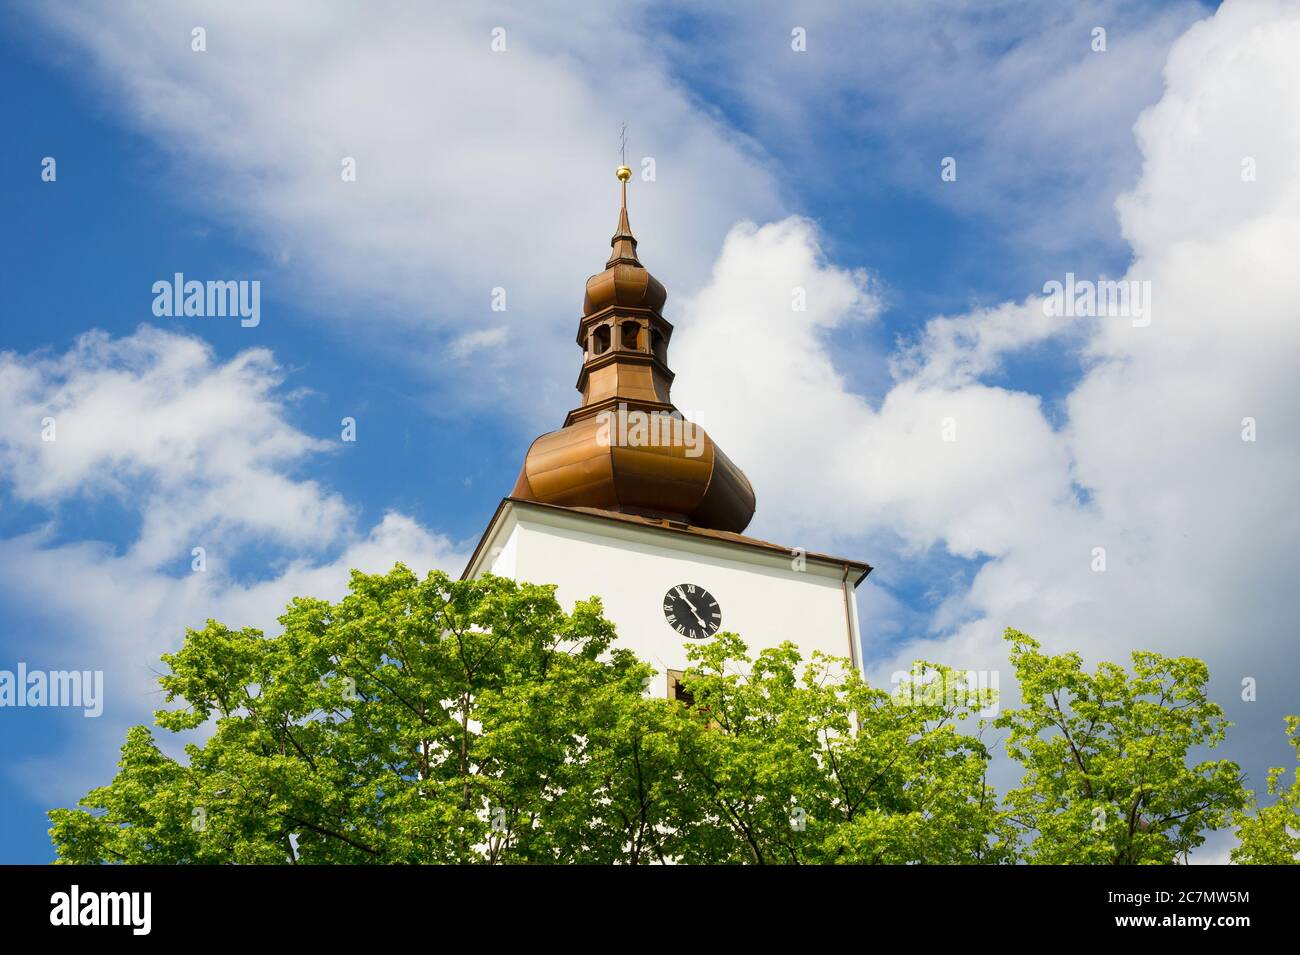 Detail of old historical architecture - baroque tower with cupola, spire and clock. In front of building is green tree during spring or summer Stock Photo